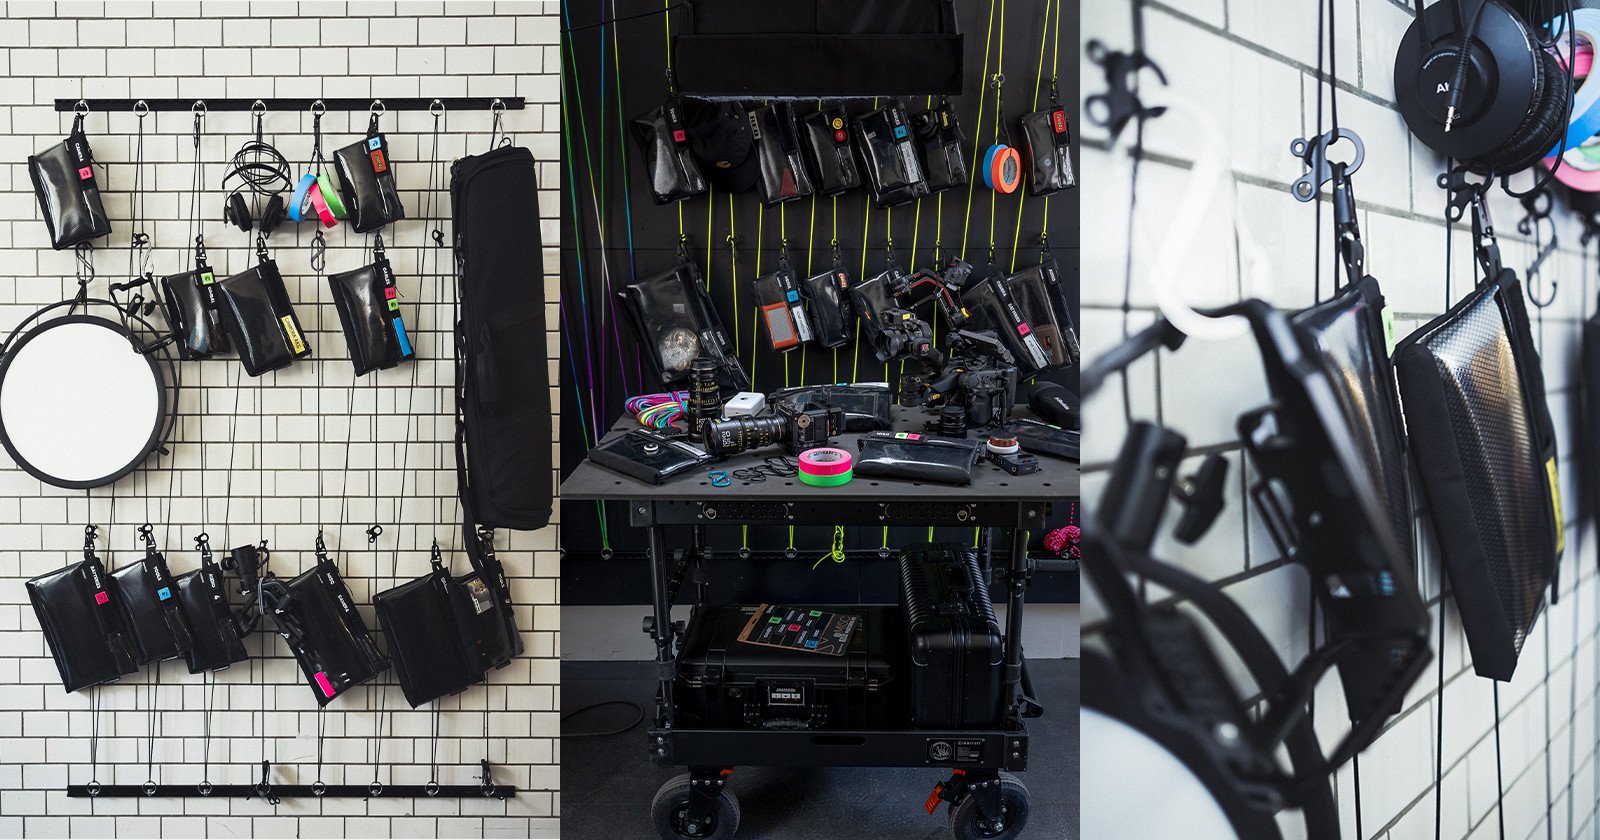 The CRDWALL is a Dynamic Wall-Based Photo Gear Storage System